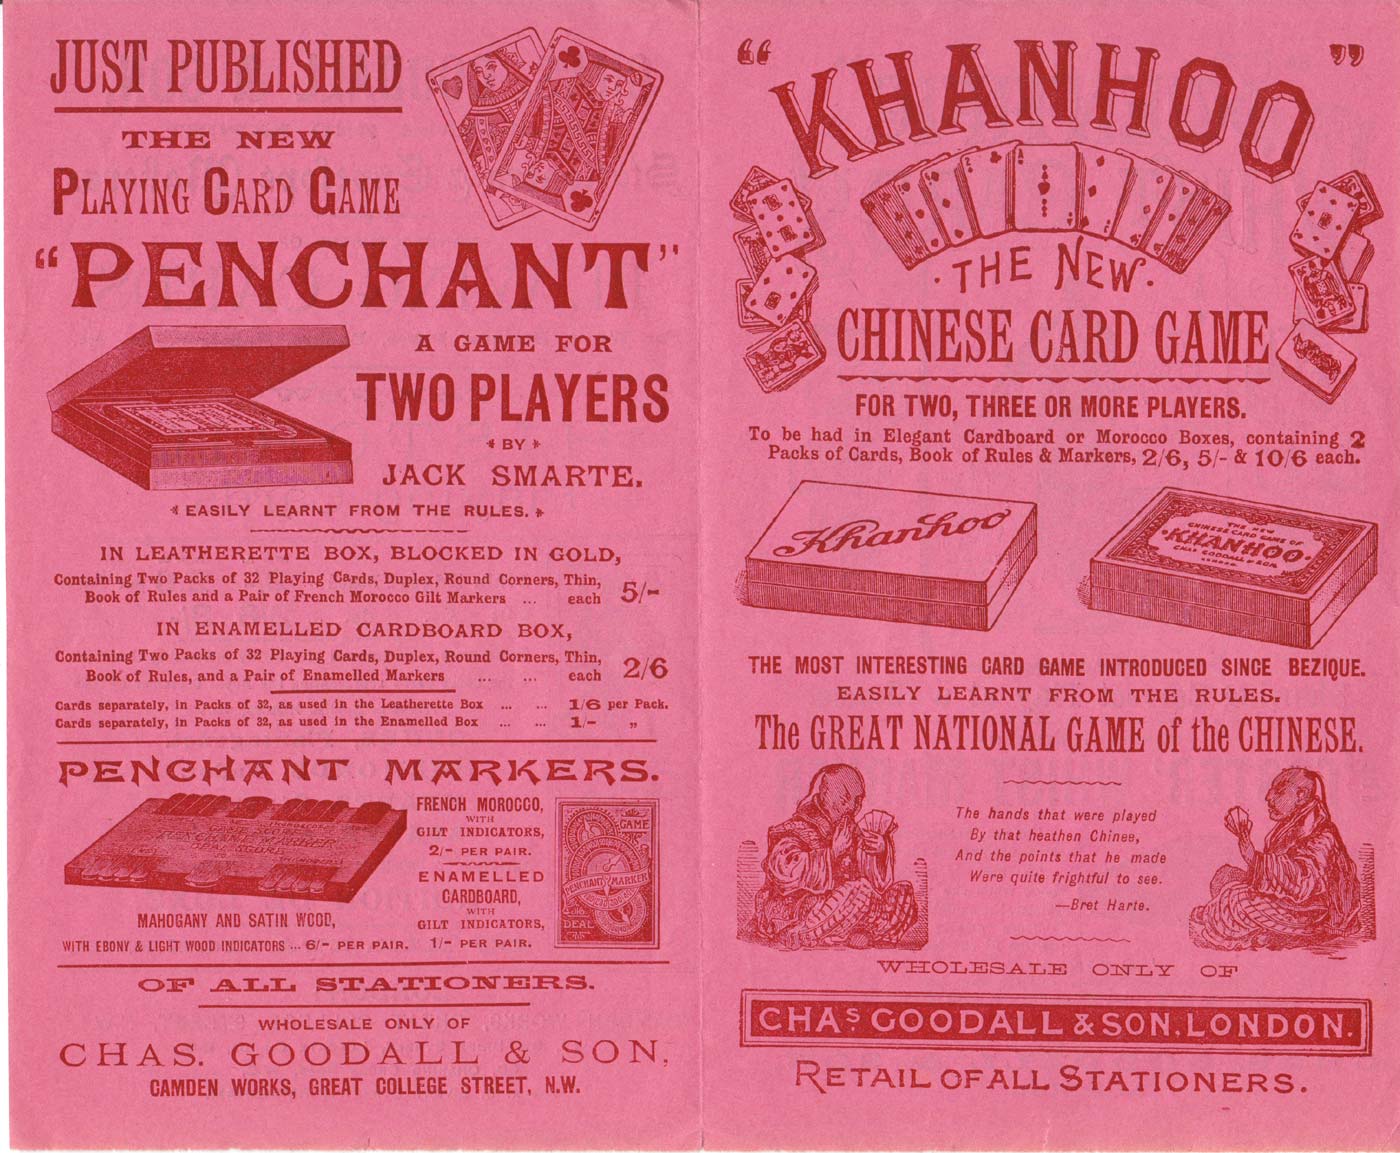 New KHANHOO the ancient Chinese card game 